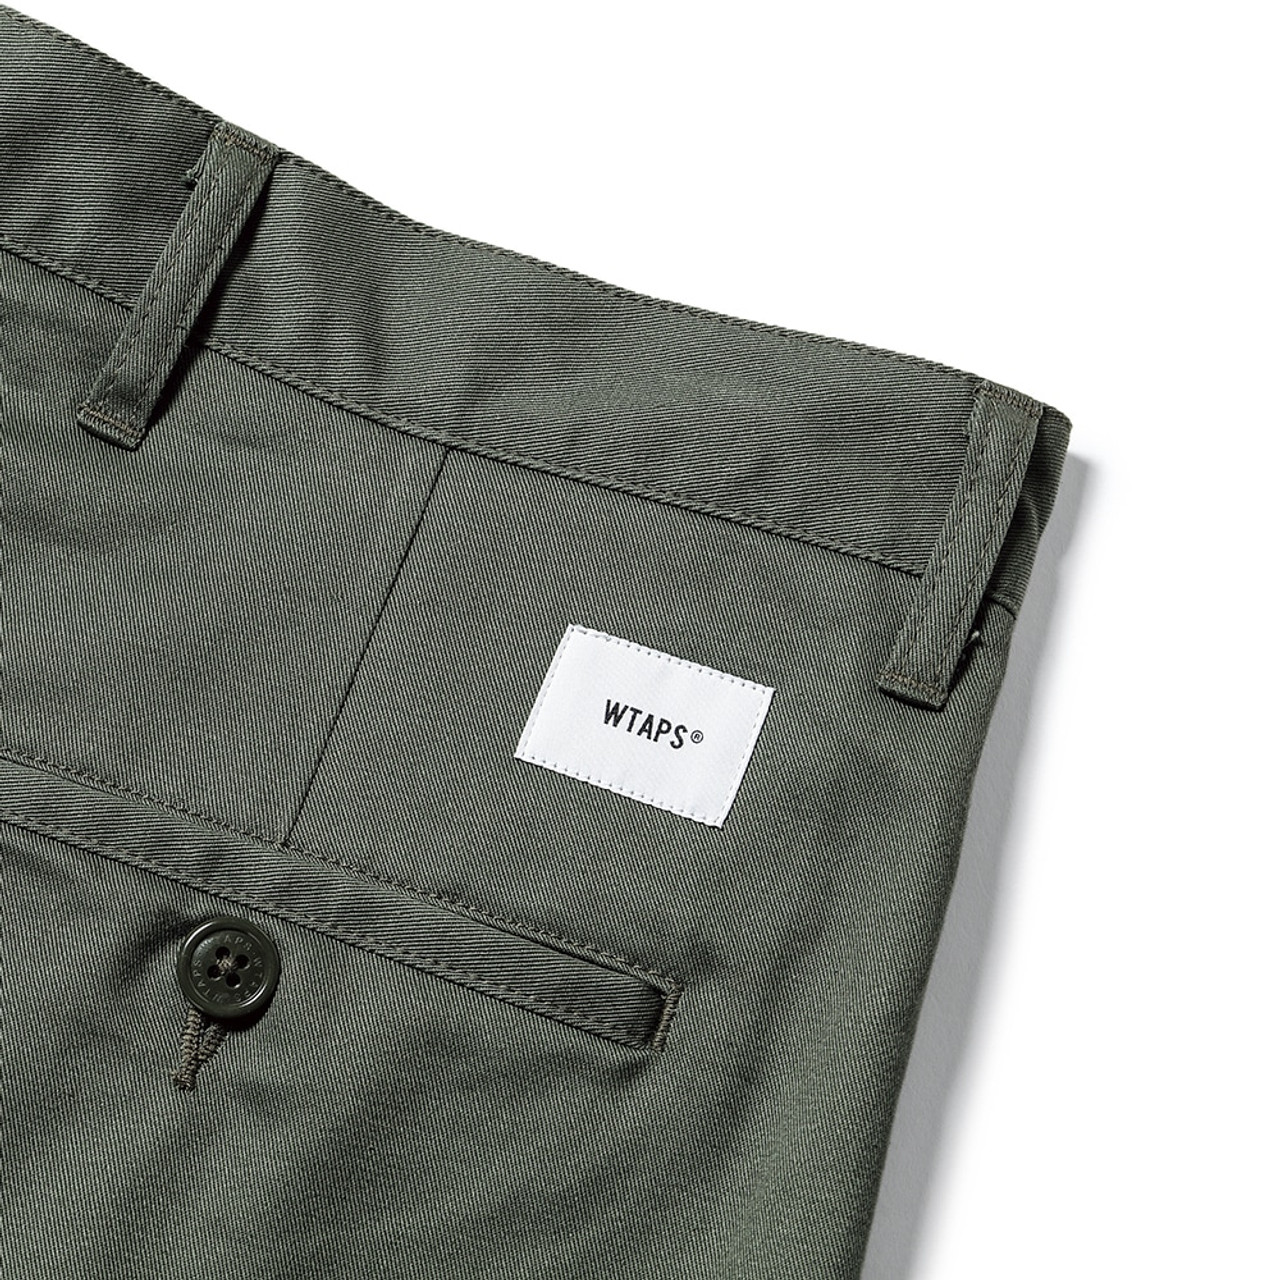 WTAPS Trousers TUCK 02 / SHORTS / COTTON. TWILL